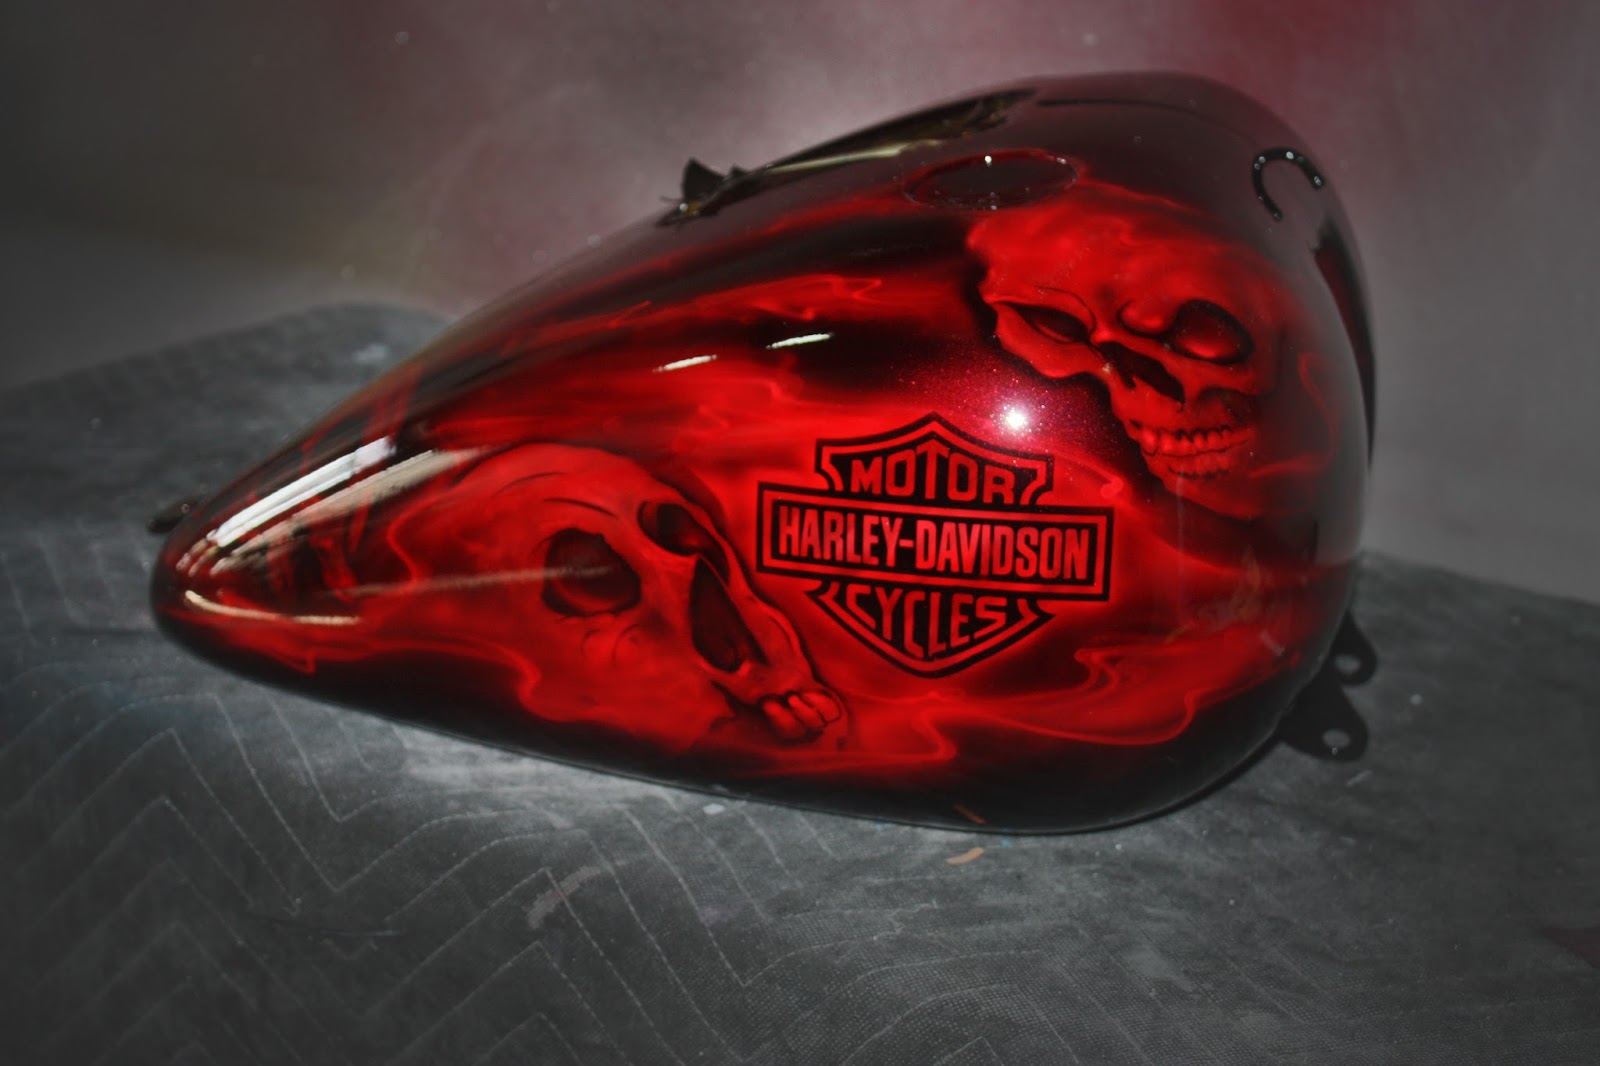 Kirkegård forlade Pas på Online Motorcycle Paint Shop: Candy Apple Red Metallic with skulls and smok